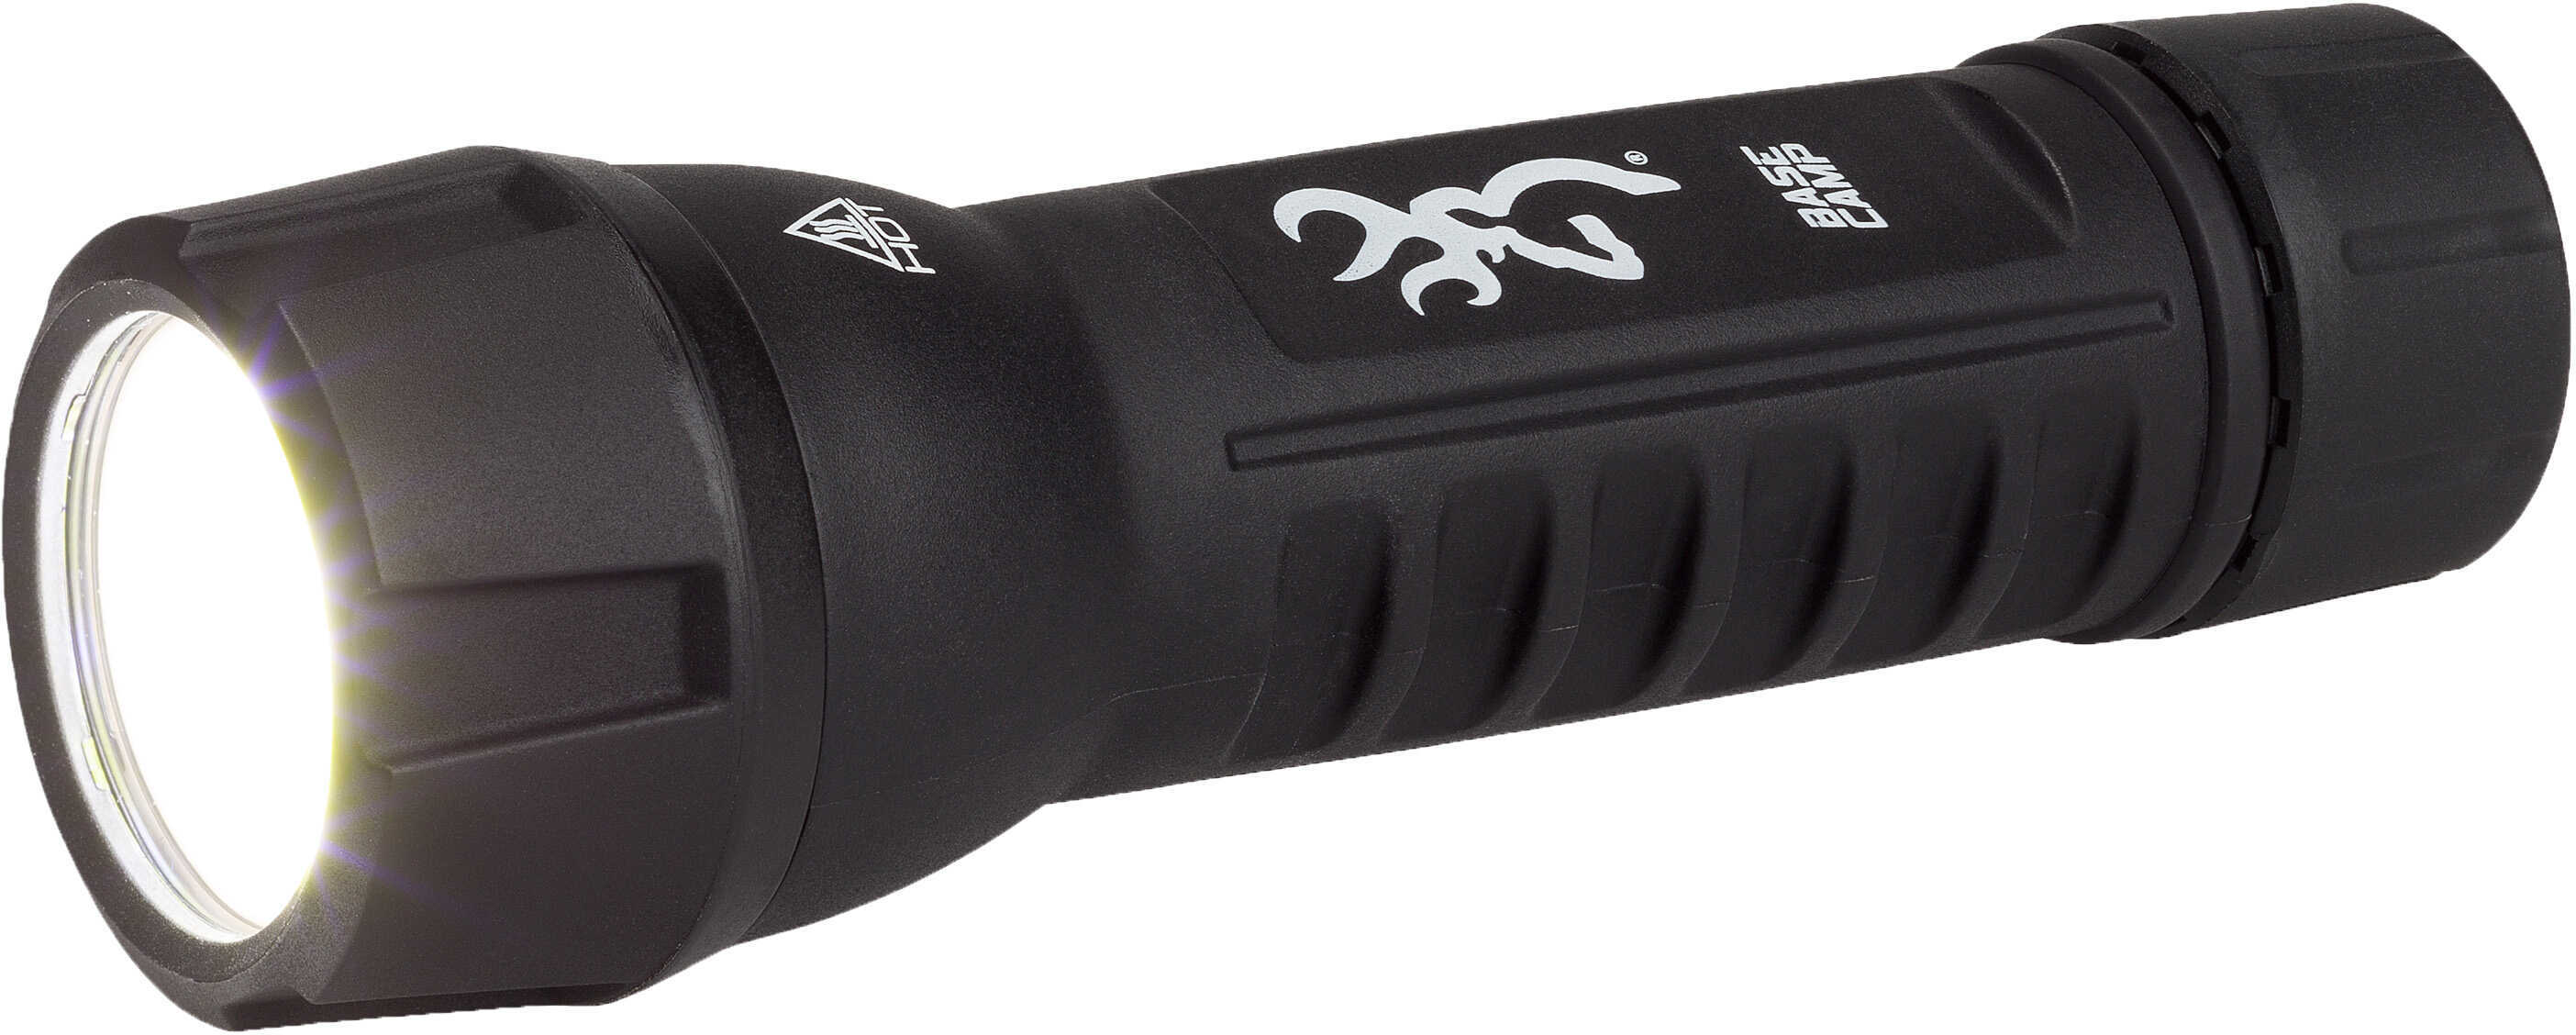 Browning 3713317 Base Camp Pro Hunter Flashlight 19-505 Lumens AAA (3) Included Battery Black